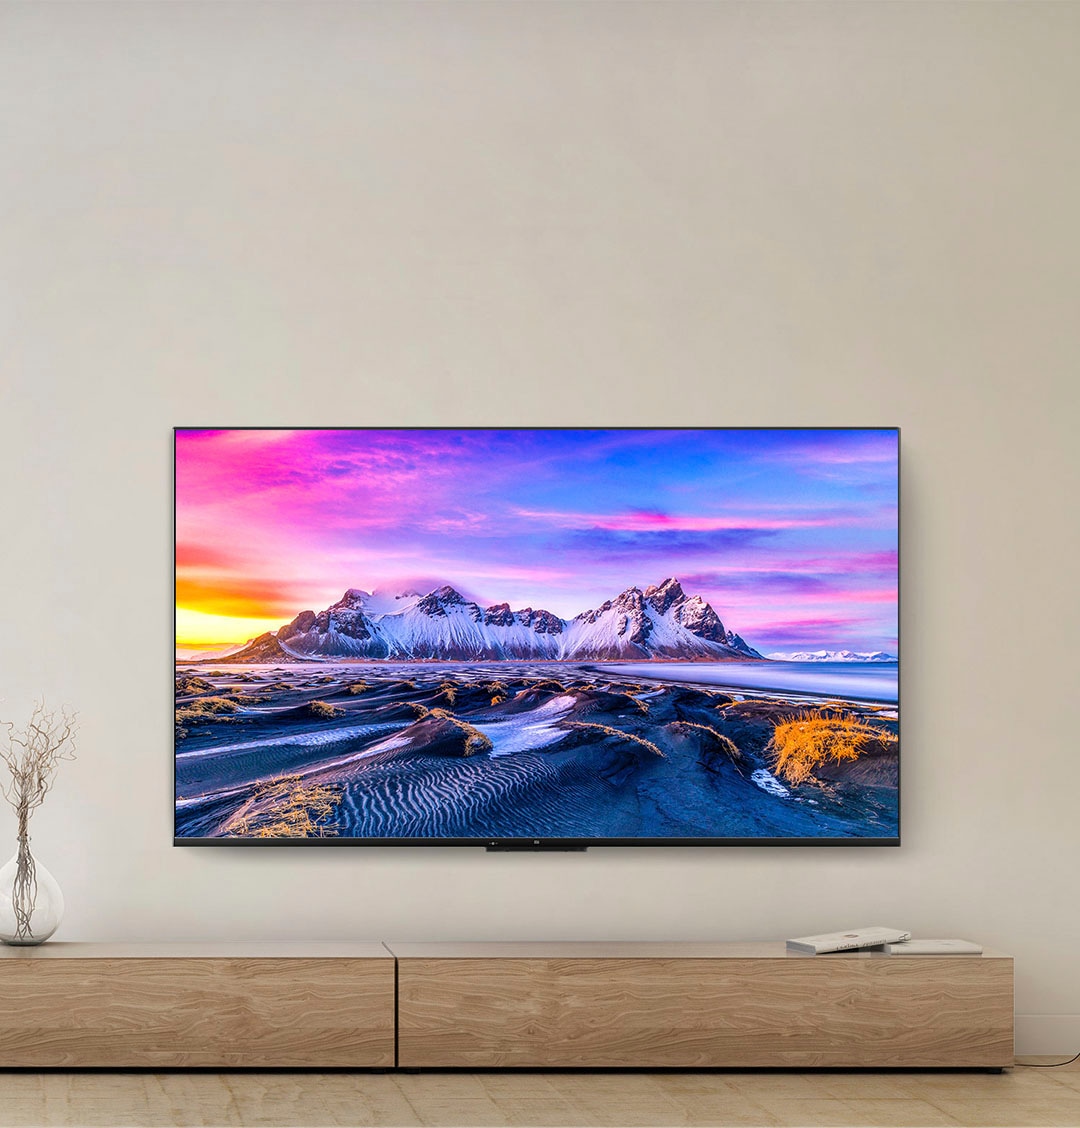 Xiaomi LED-Fernseher »L55M6-6AEU«, 138 cm/55 Zoll, 4K Ultra HD, Smart-TV-Android TV, Dolby Vision®, HDR10+, Xiaomi P1 55 Zoll TV